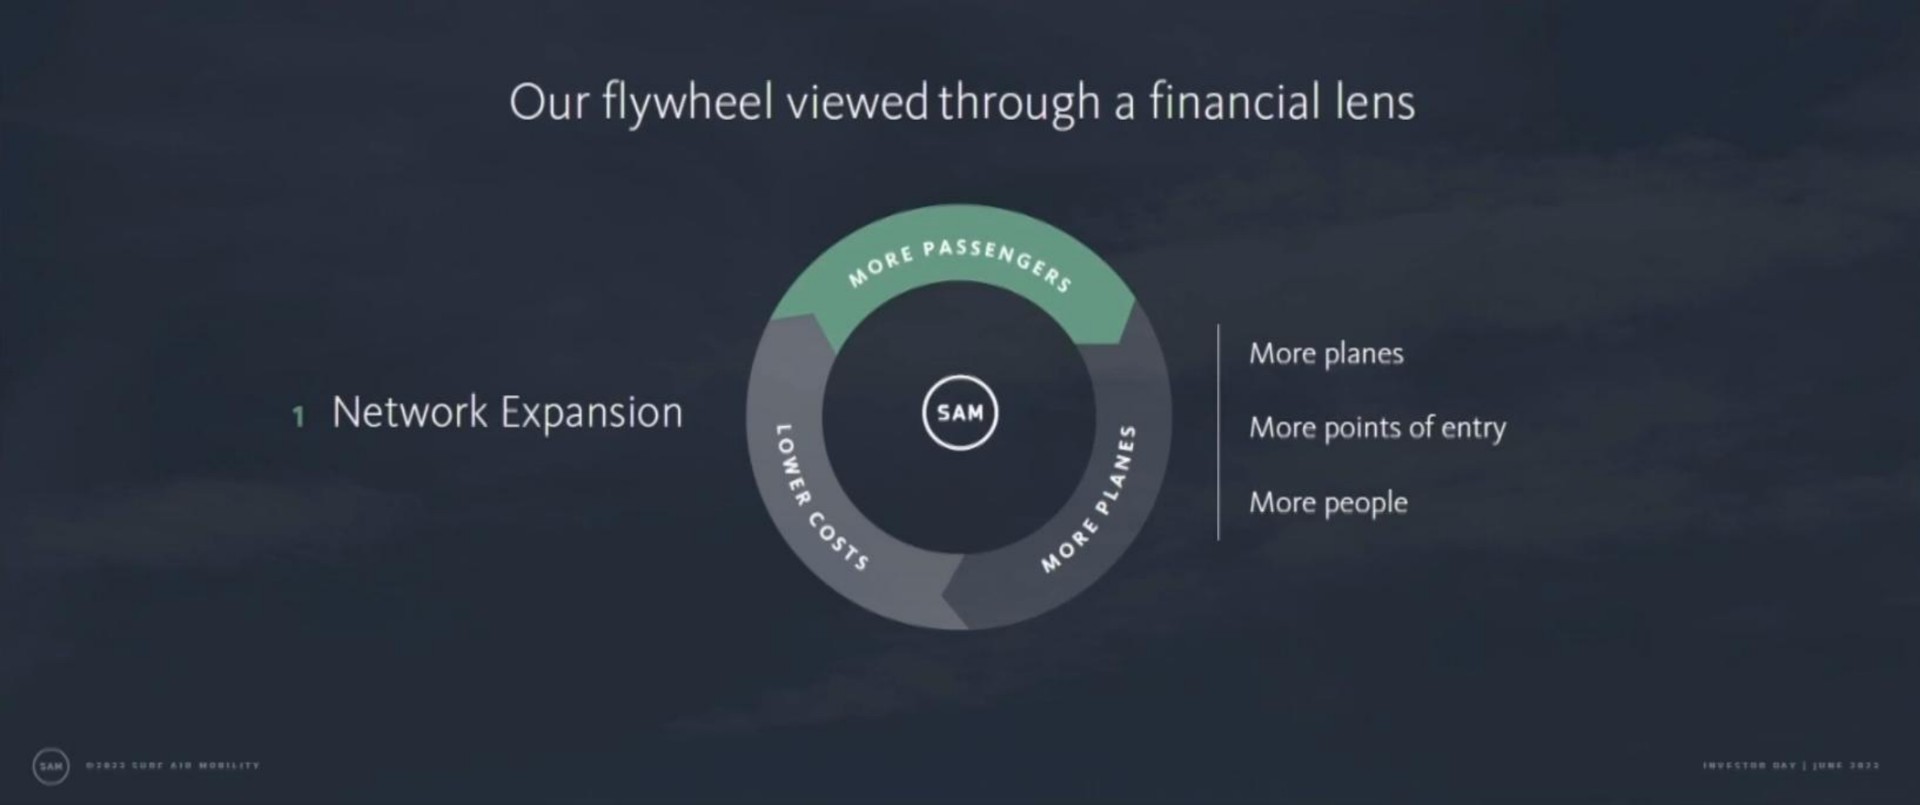 our flywheel viewed through a financial lens network expansion a a more planes more points of entry more people | Surf Air